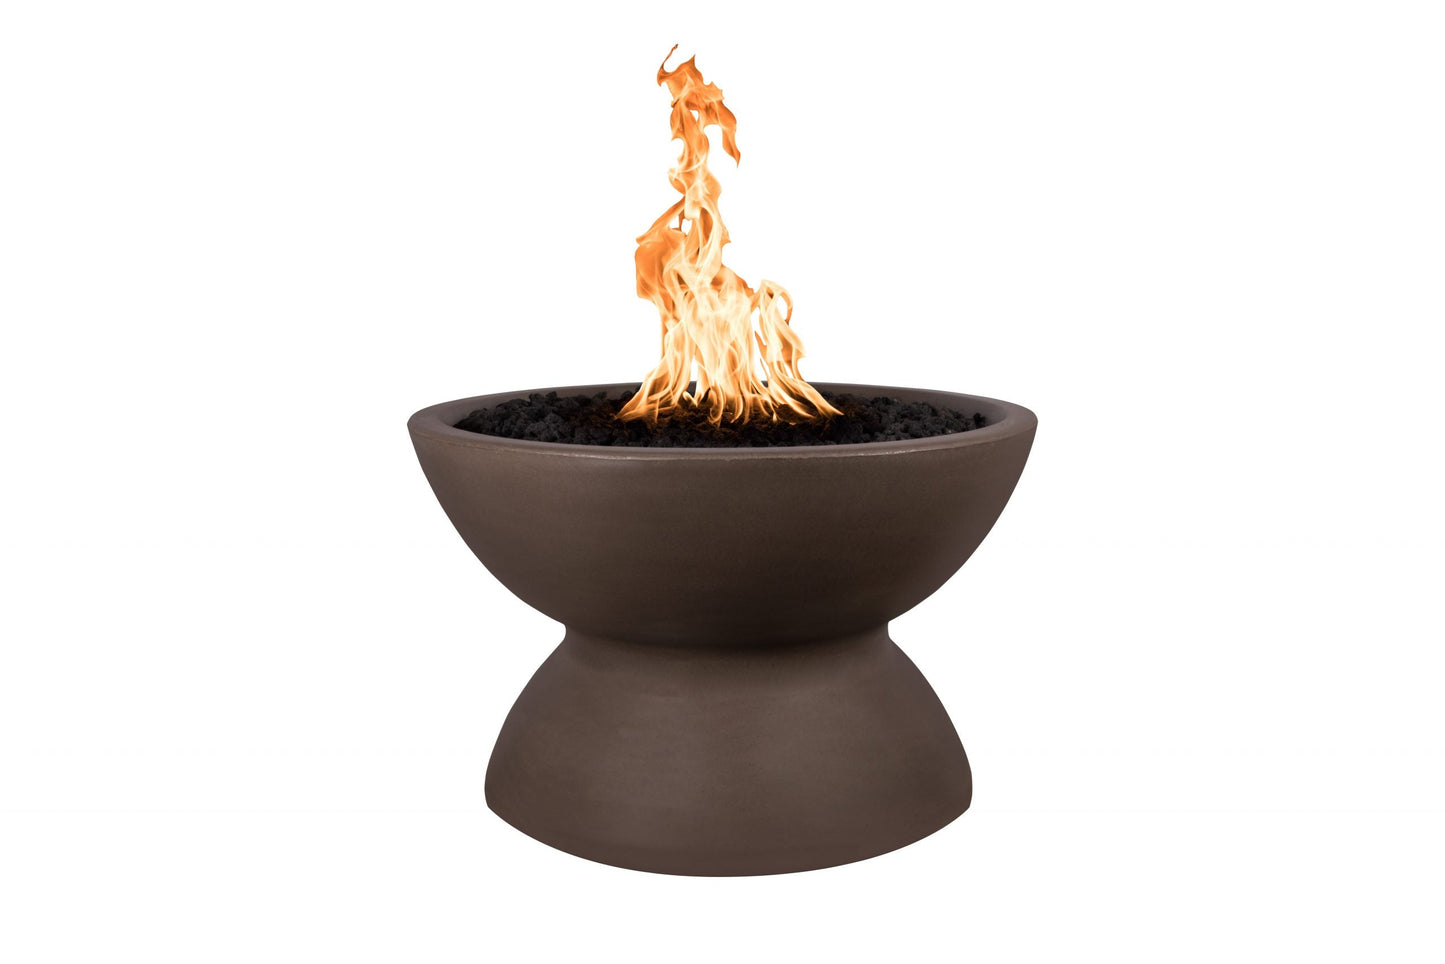 The Outdoor Plus Round Copa 33" Natural Gray GFRC Concrete Liquid Propane Fire Pit with Match Lit Ignition